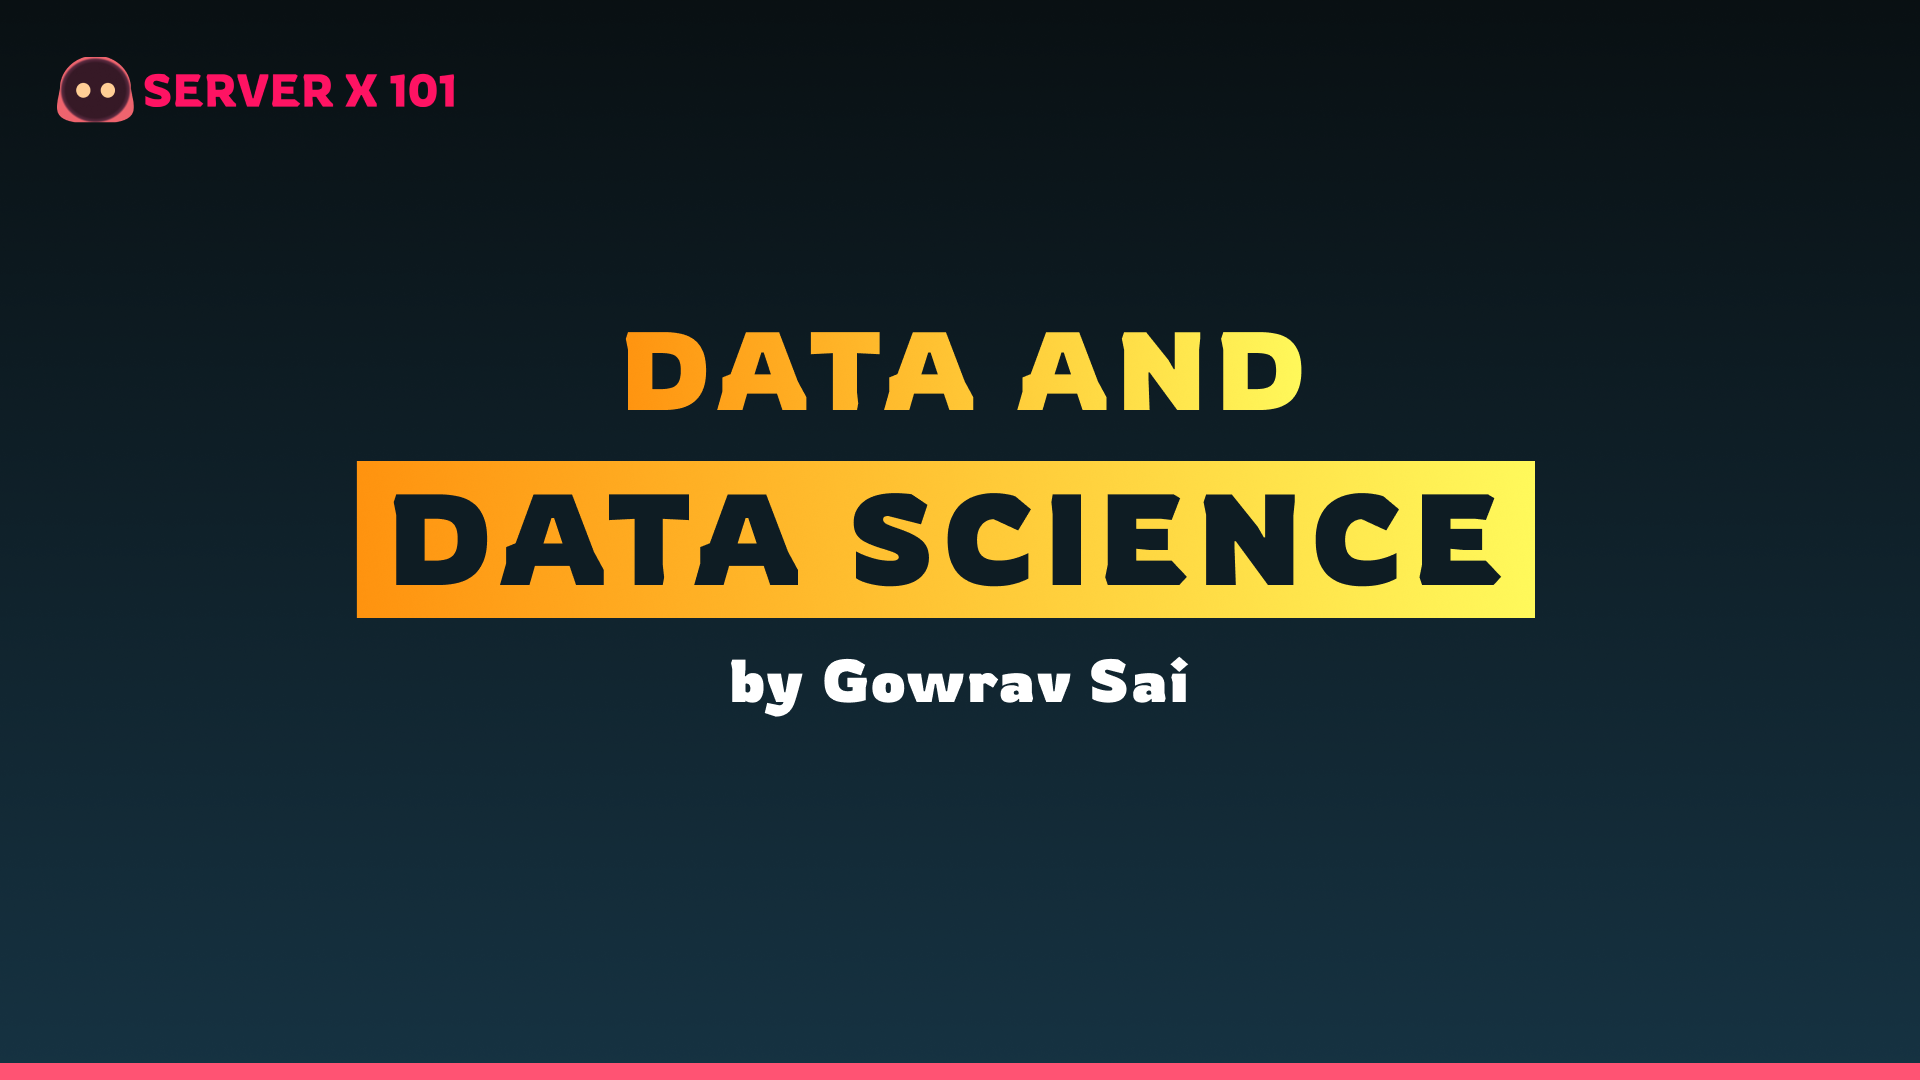 Data and Data Science